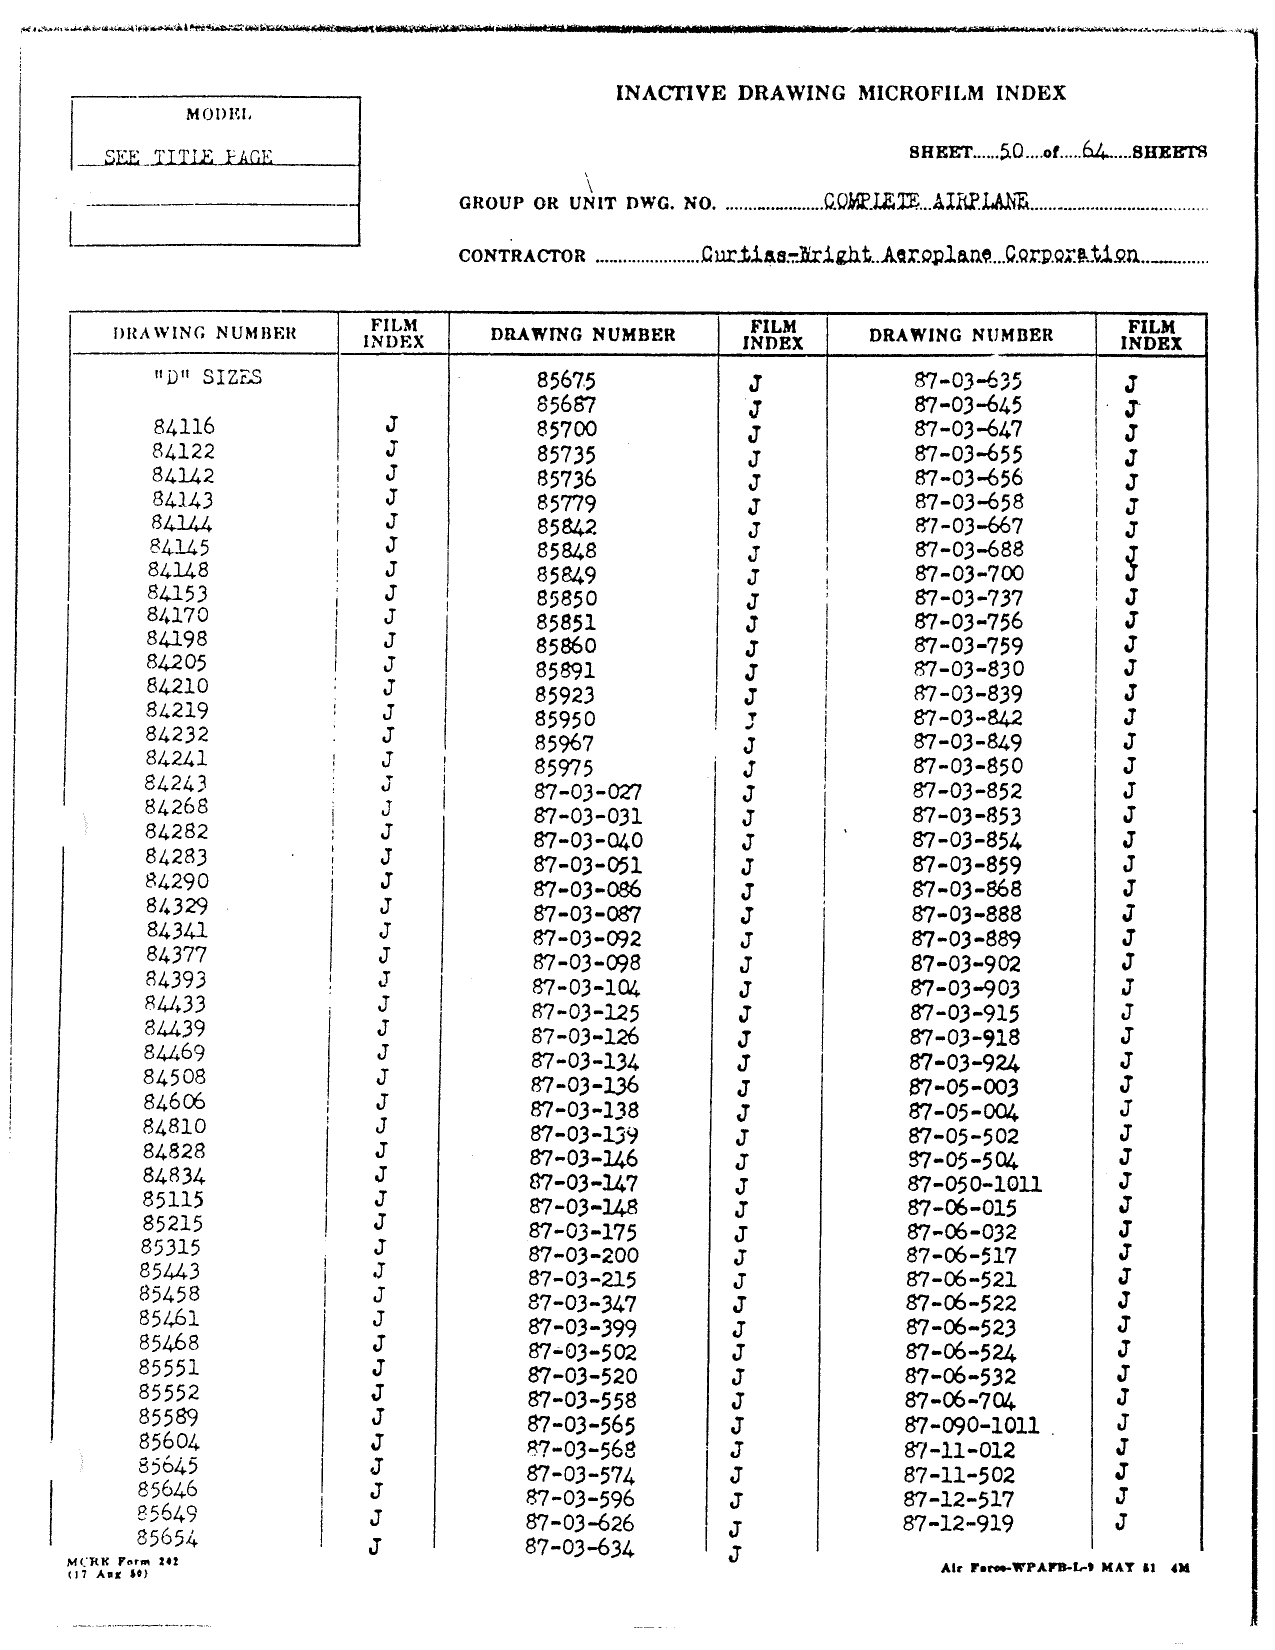 Sample page 50 from AirCorps Library document: P40 Drawing Index (Early)